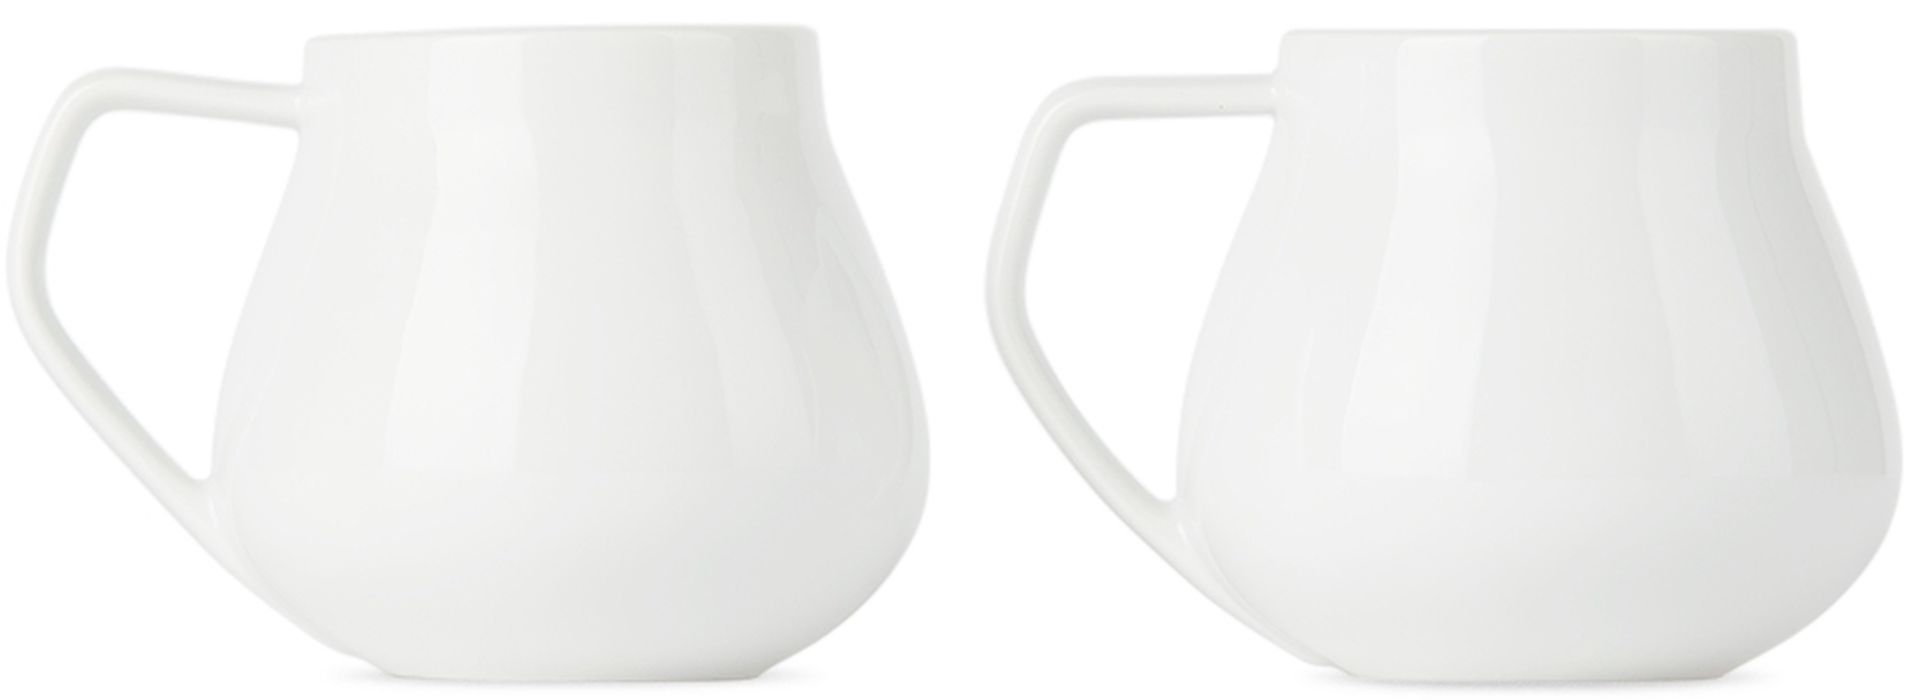 Georg Jensen Two-Pack White Sky Thermo Mugs